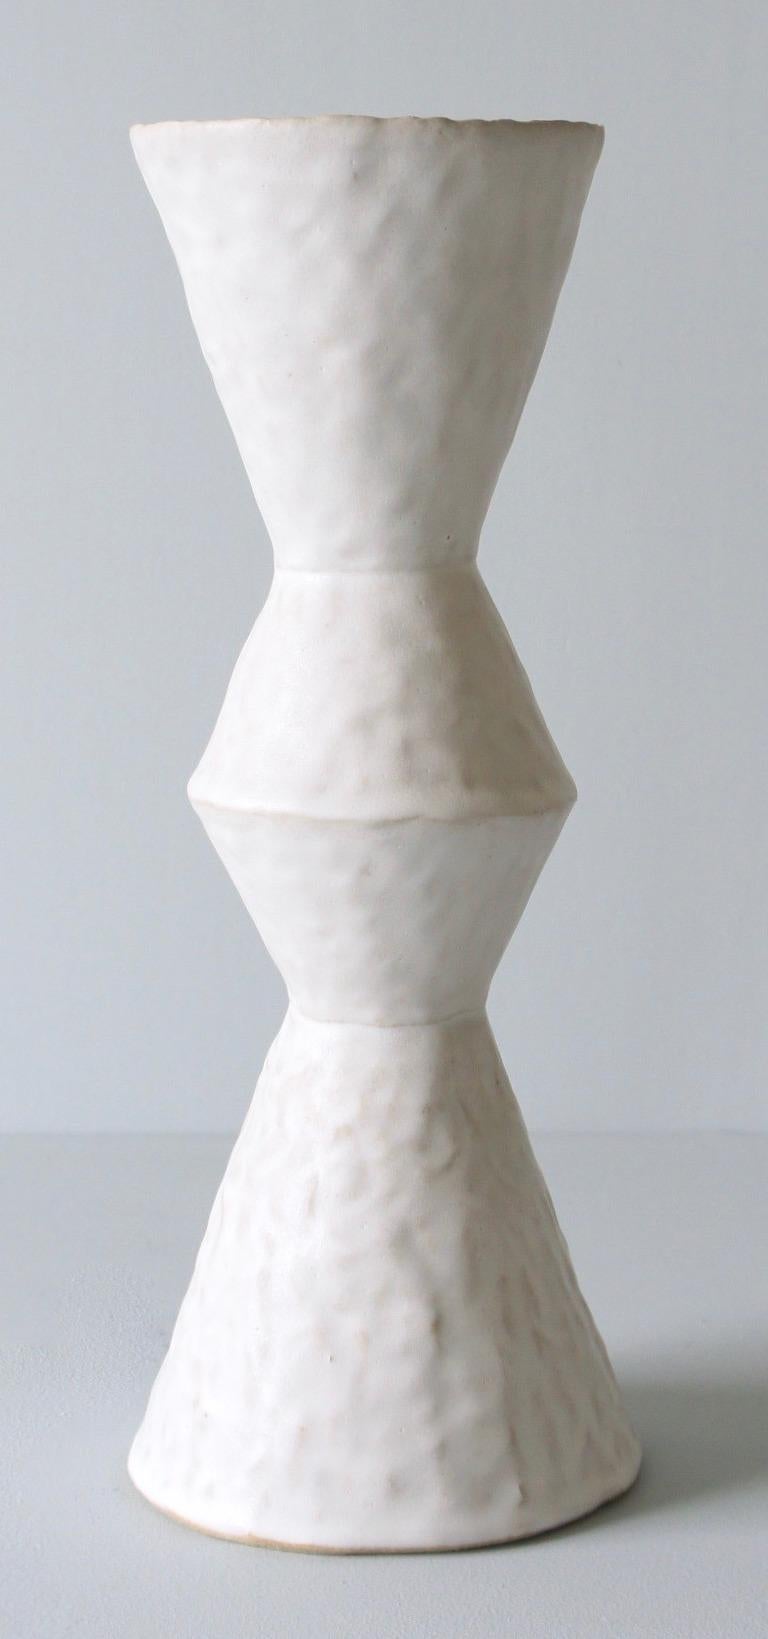 Contemporary American ceramic artist Giselle Hicks' glazed white stoneware vase is part of her Vessel series. Each form is built by hand using a coil and pinch technique. They are formal explorations in shape, volume, color and composition. The